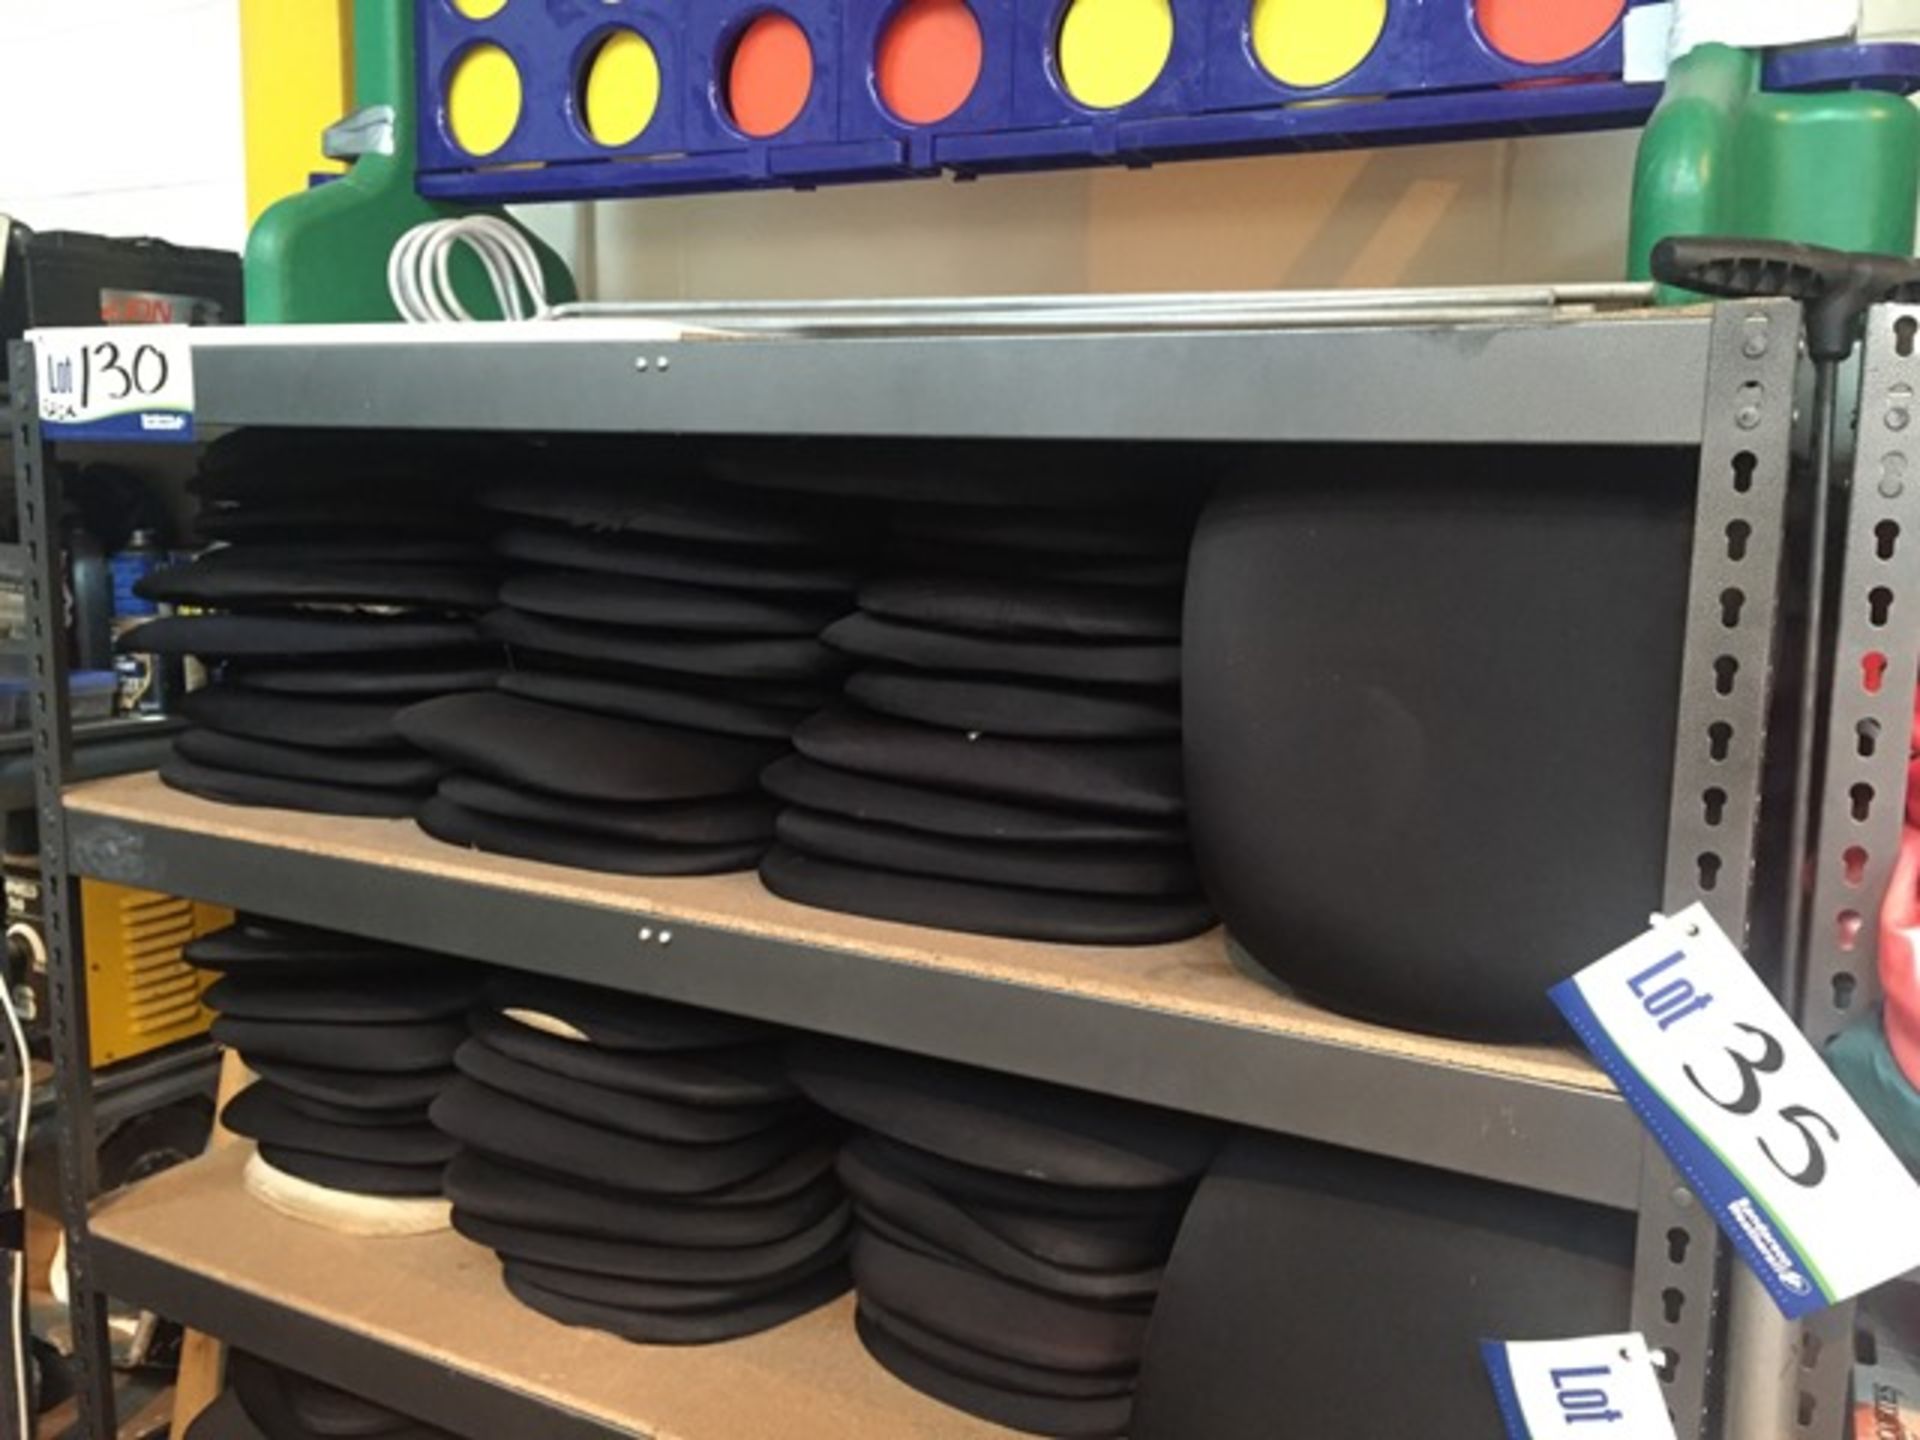 Forty Three Black Velcro Seat Pads as set out on shelving